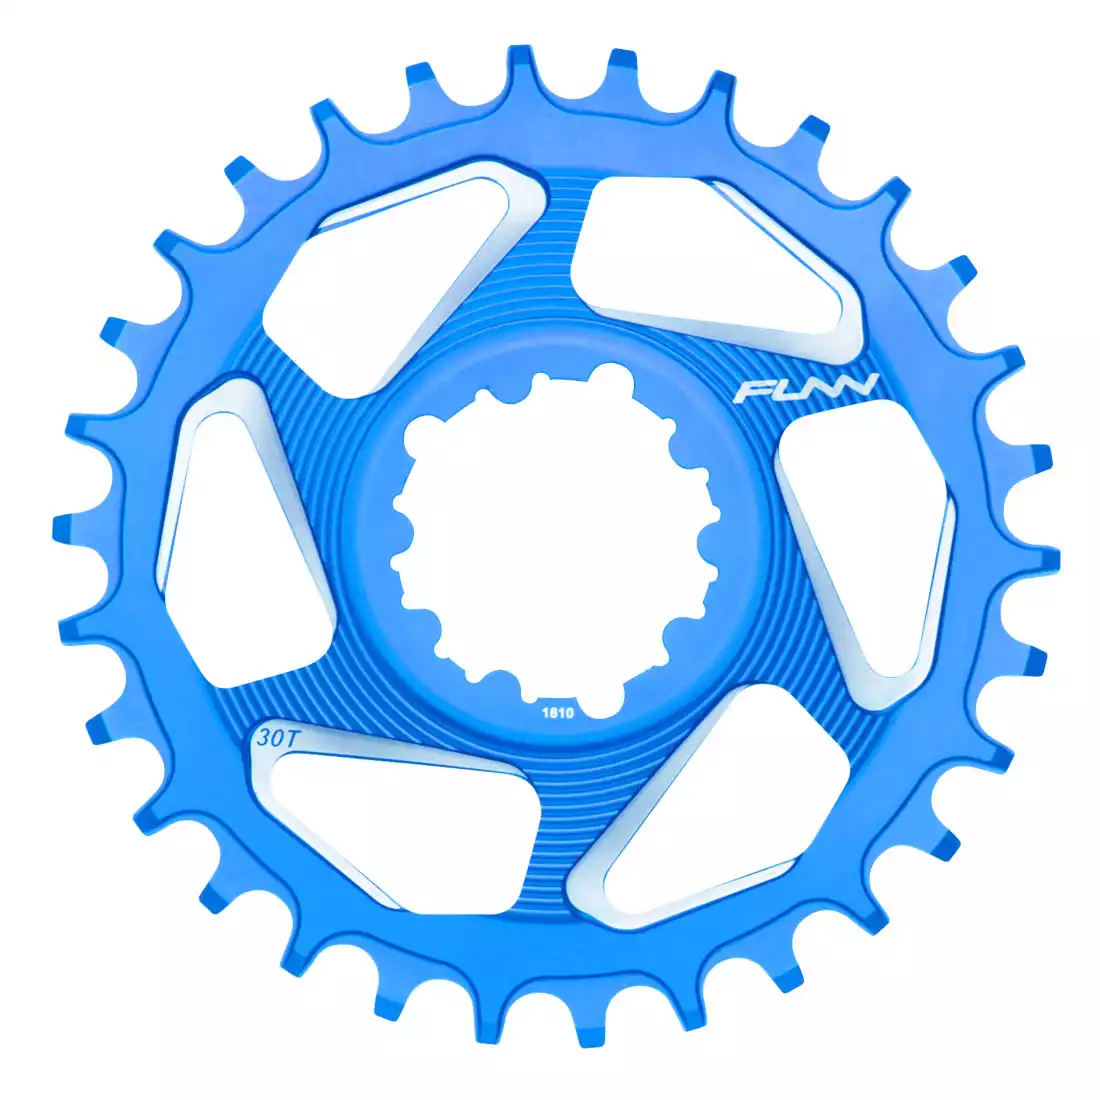 FUNN SOLO DX NARROW-WIDE BOOST 34T blue sprocket for bicycle crank